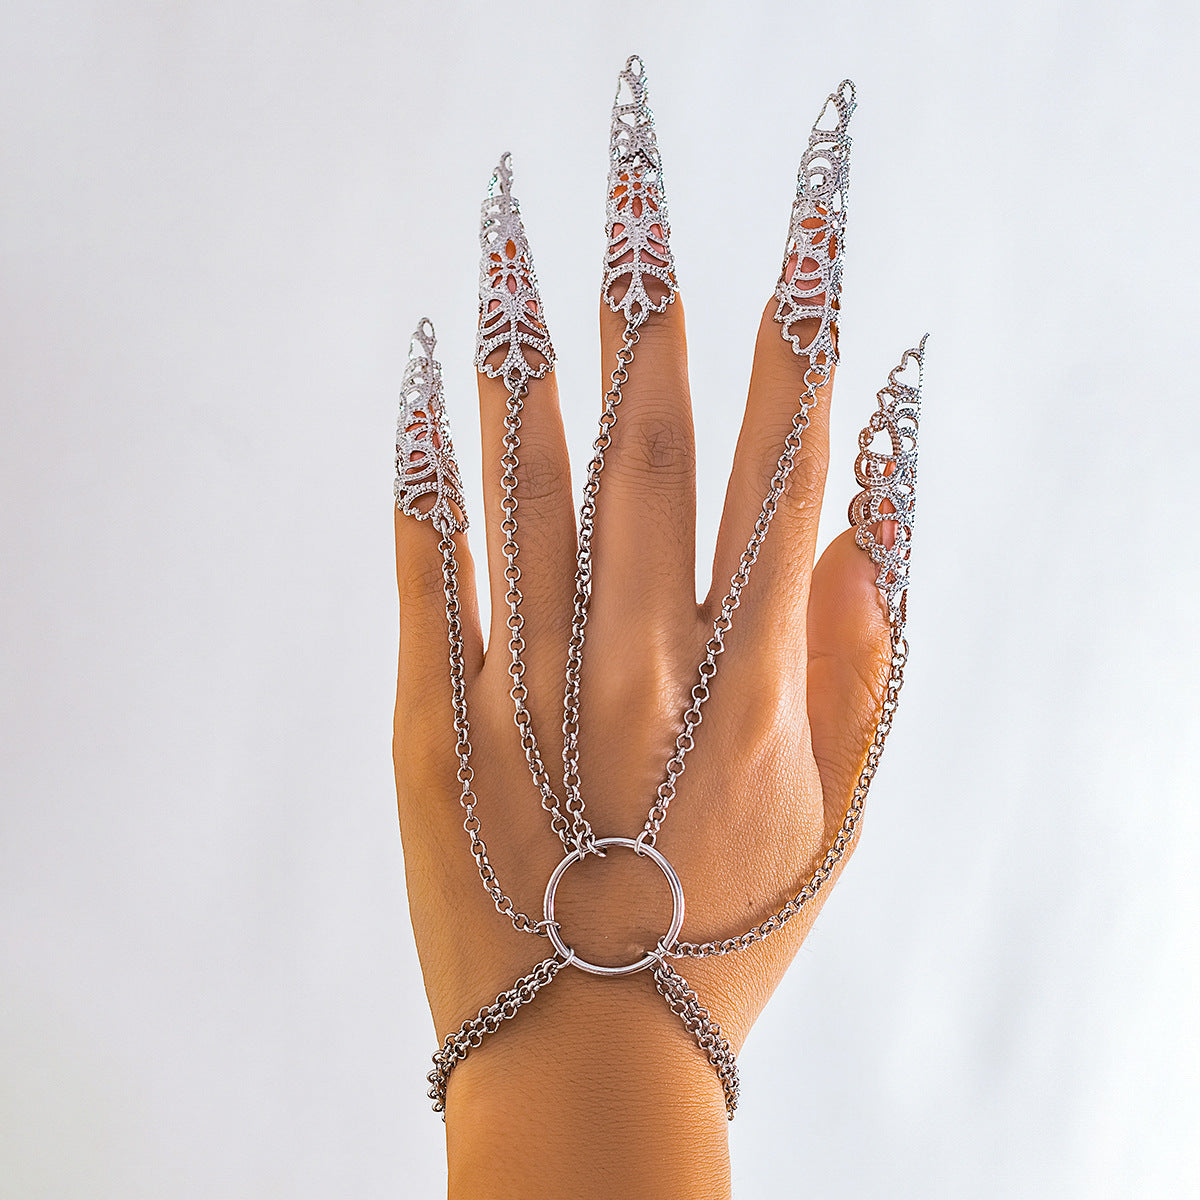 Woman wearing Dark + Unusual! Gothic Style Ring Bracelet is So Unique Silver